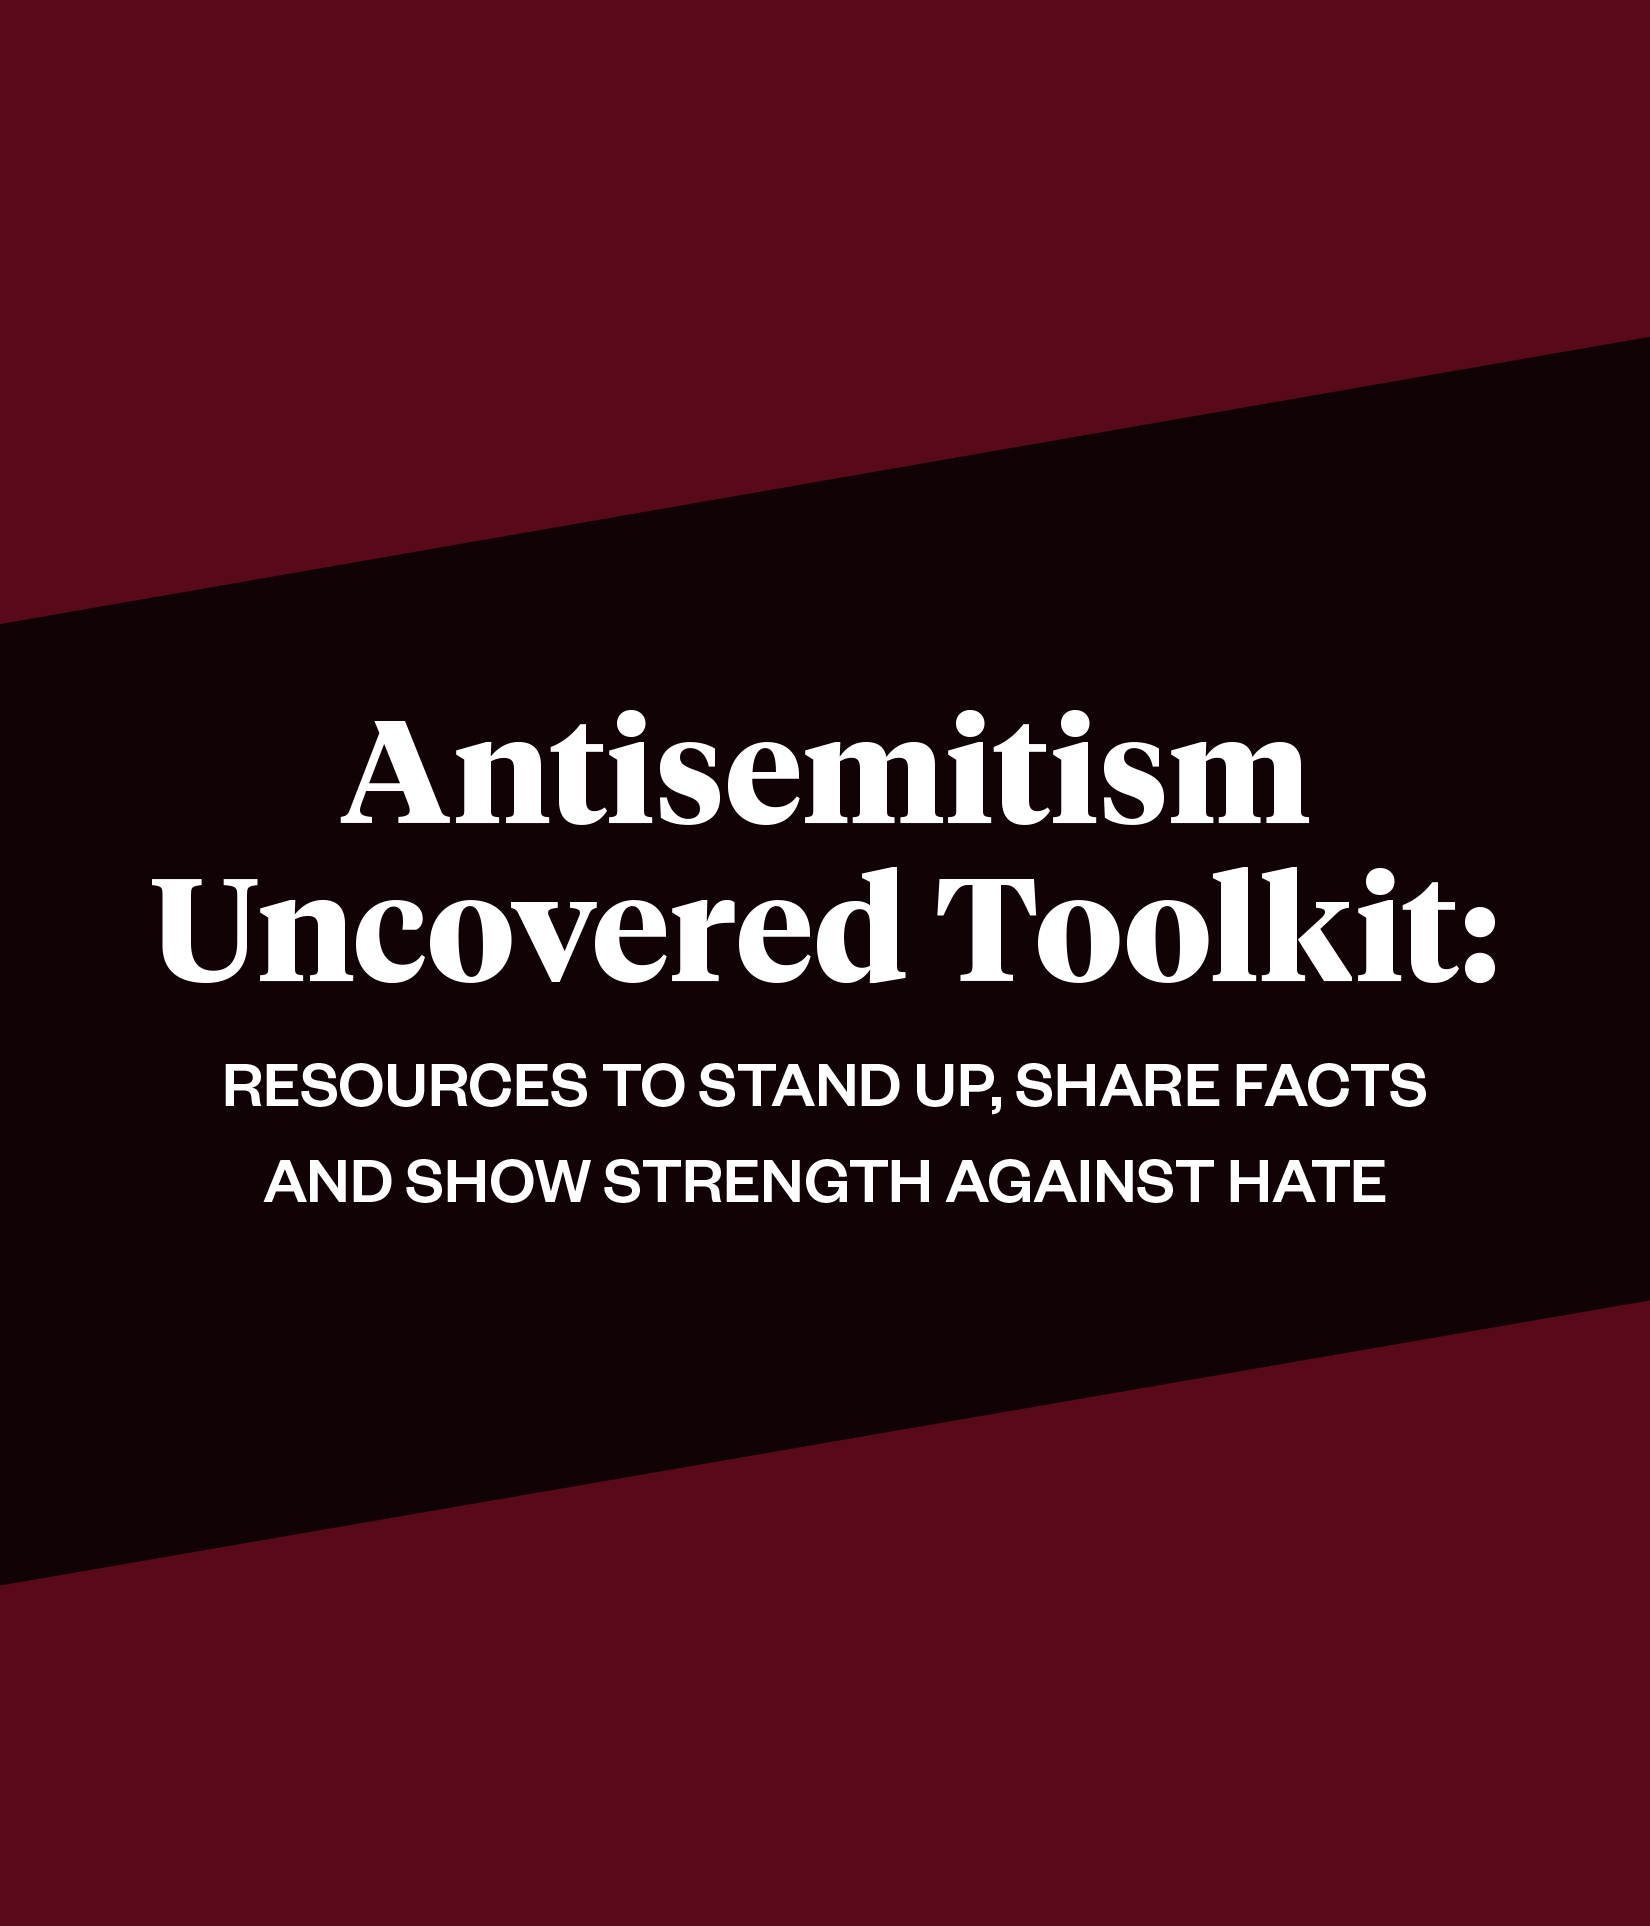 Antisemitism uncovered toolkit cover